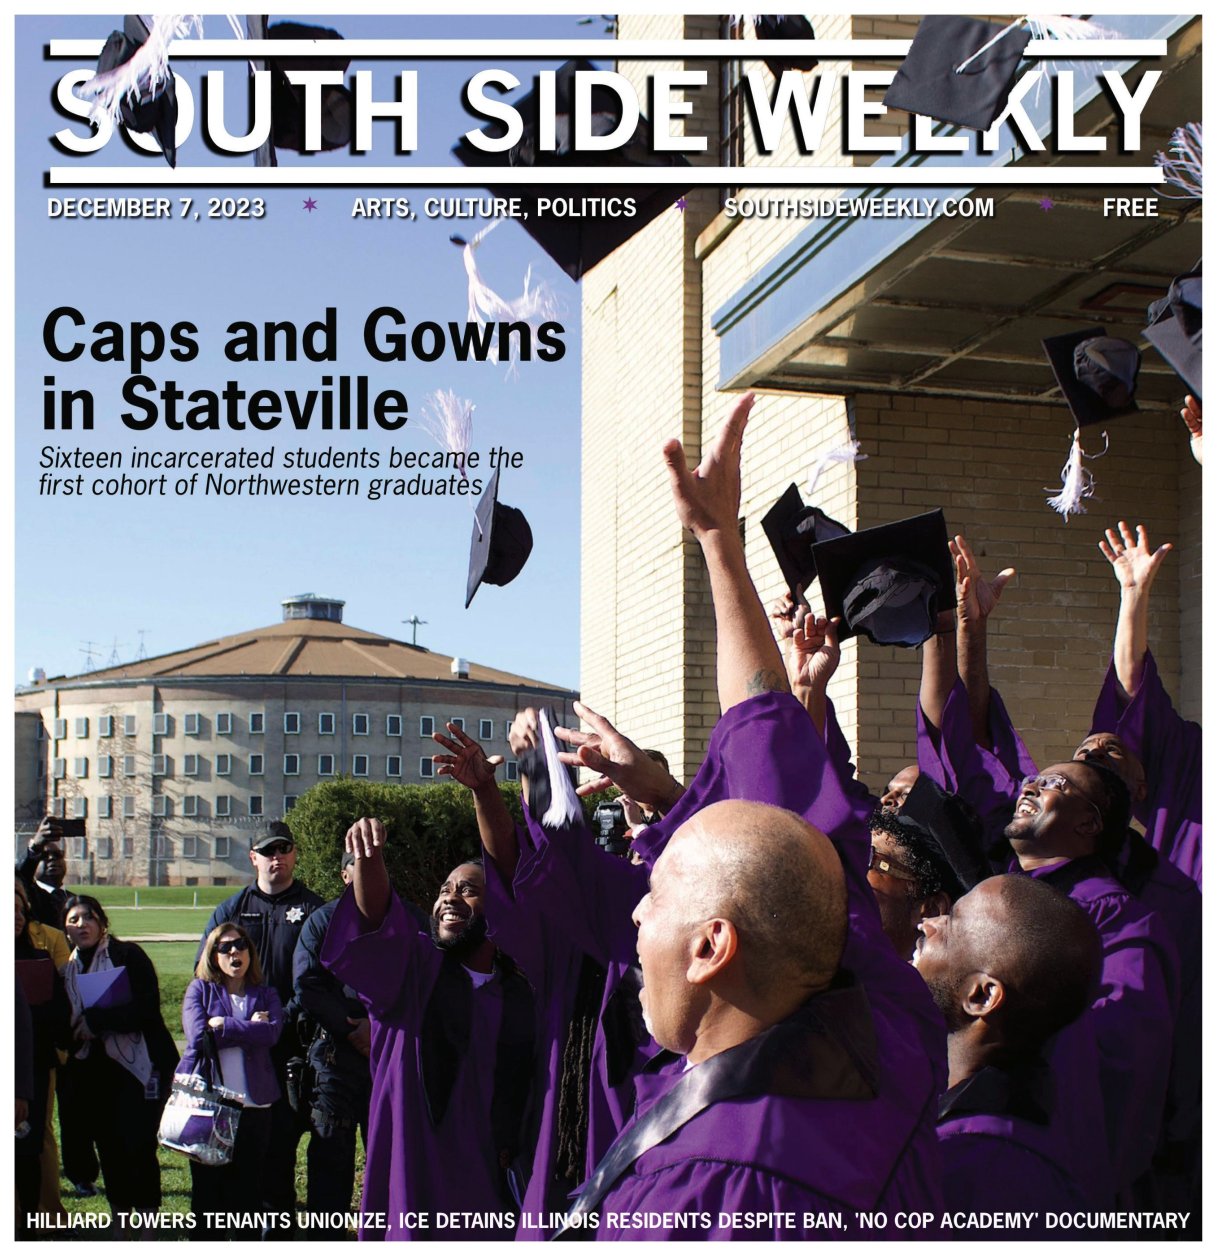 The Daily Northwestern — October 23, 2023 by The Daily Northwestern - Issuu